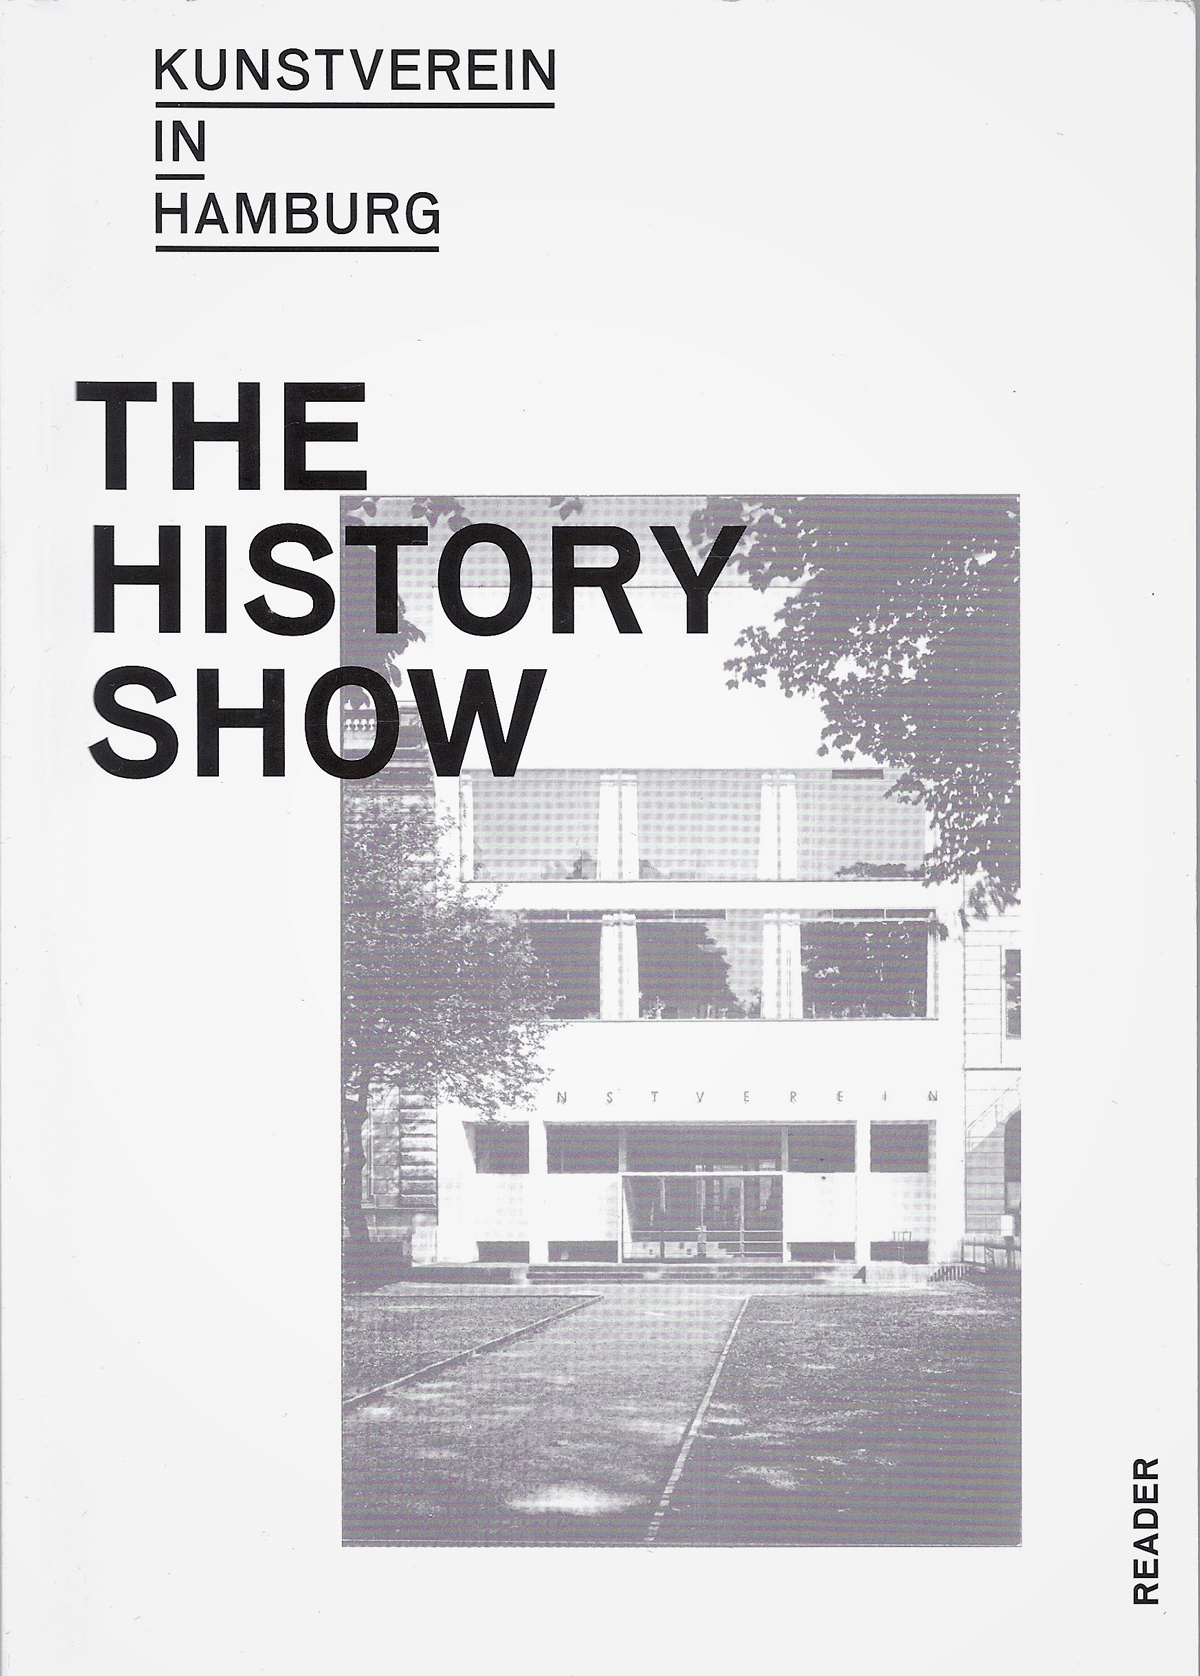 THE HISTORY SHOW.